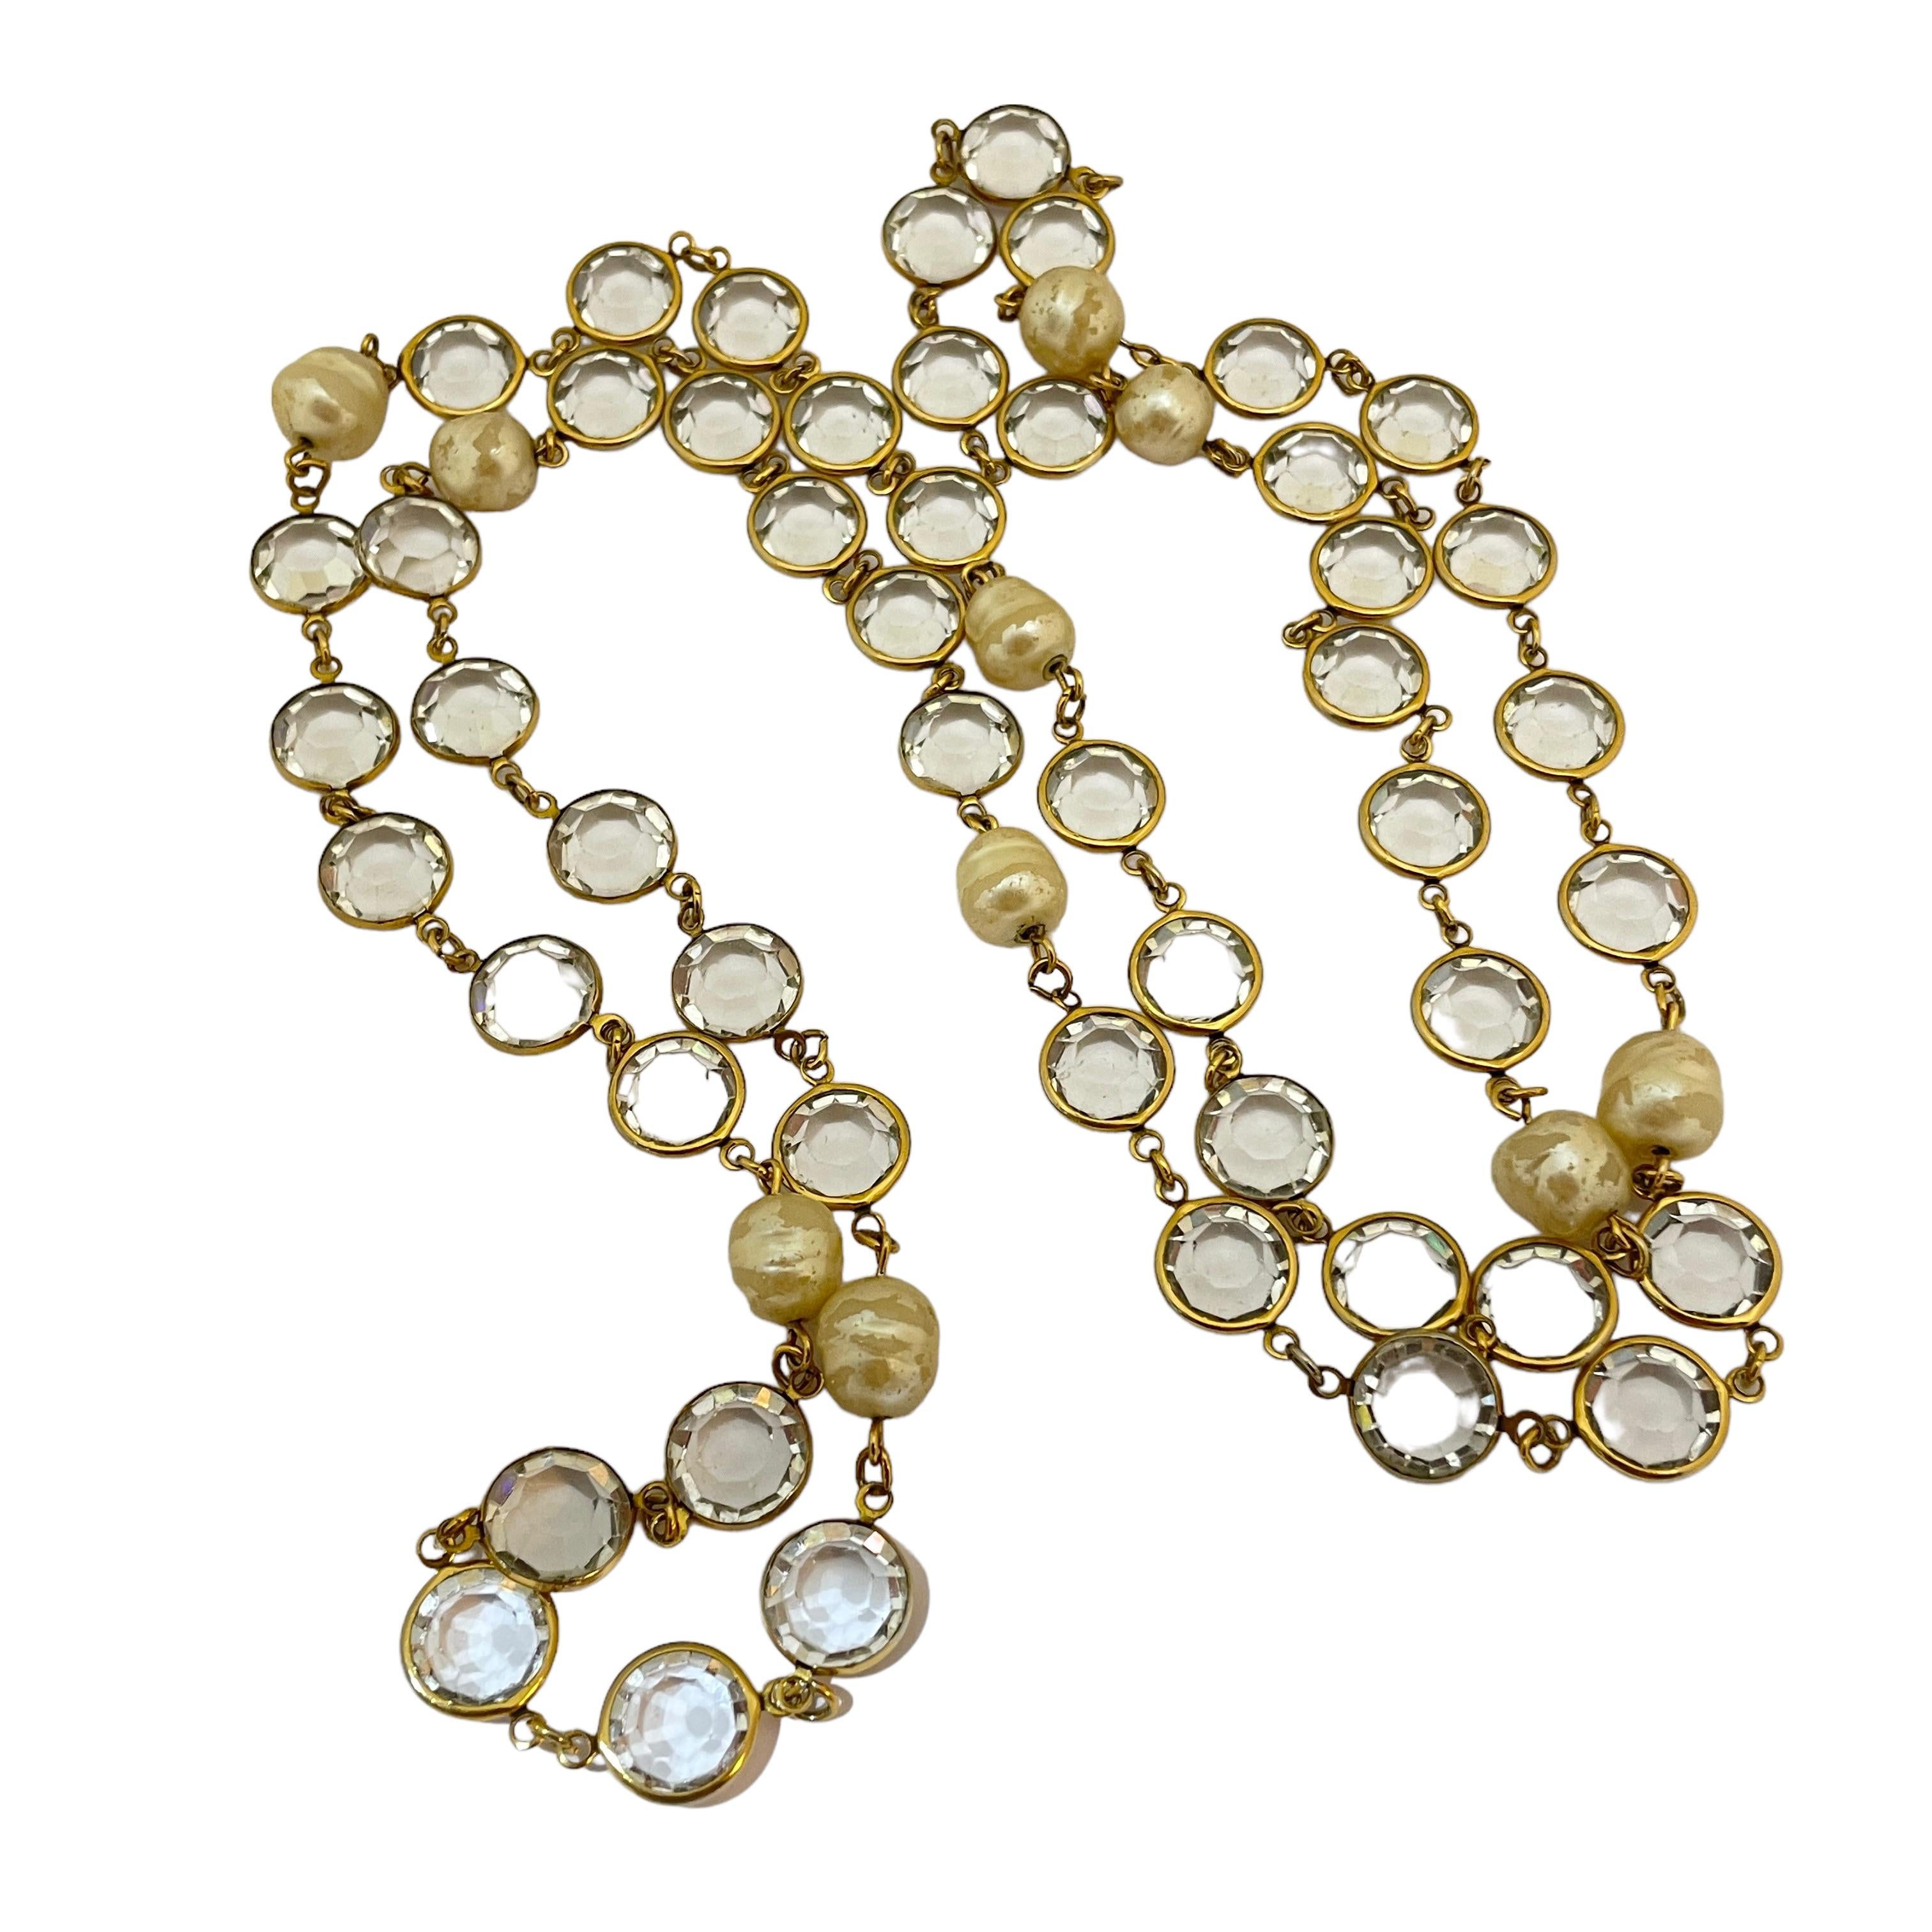 Vintage CHANEL 1981 gold pearl crystal long designer runway necklace In Fair Condition For Sale In Palos Hills, IL